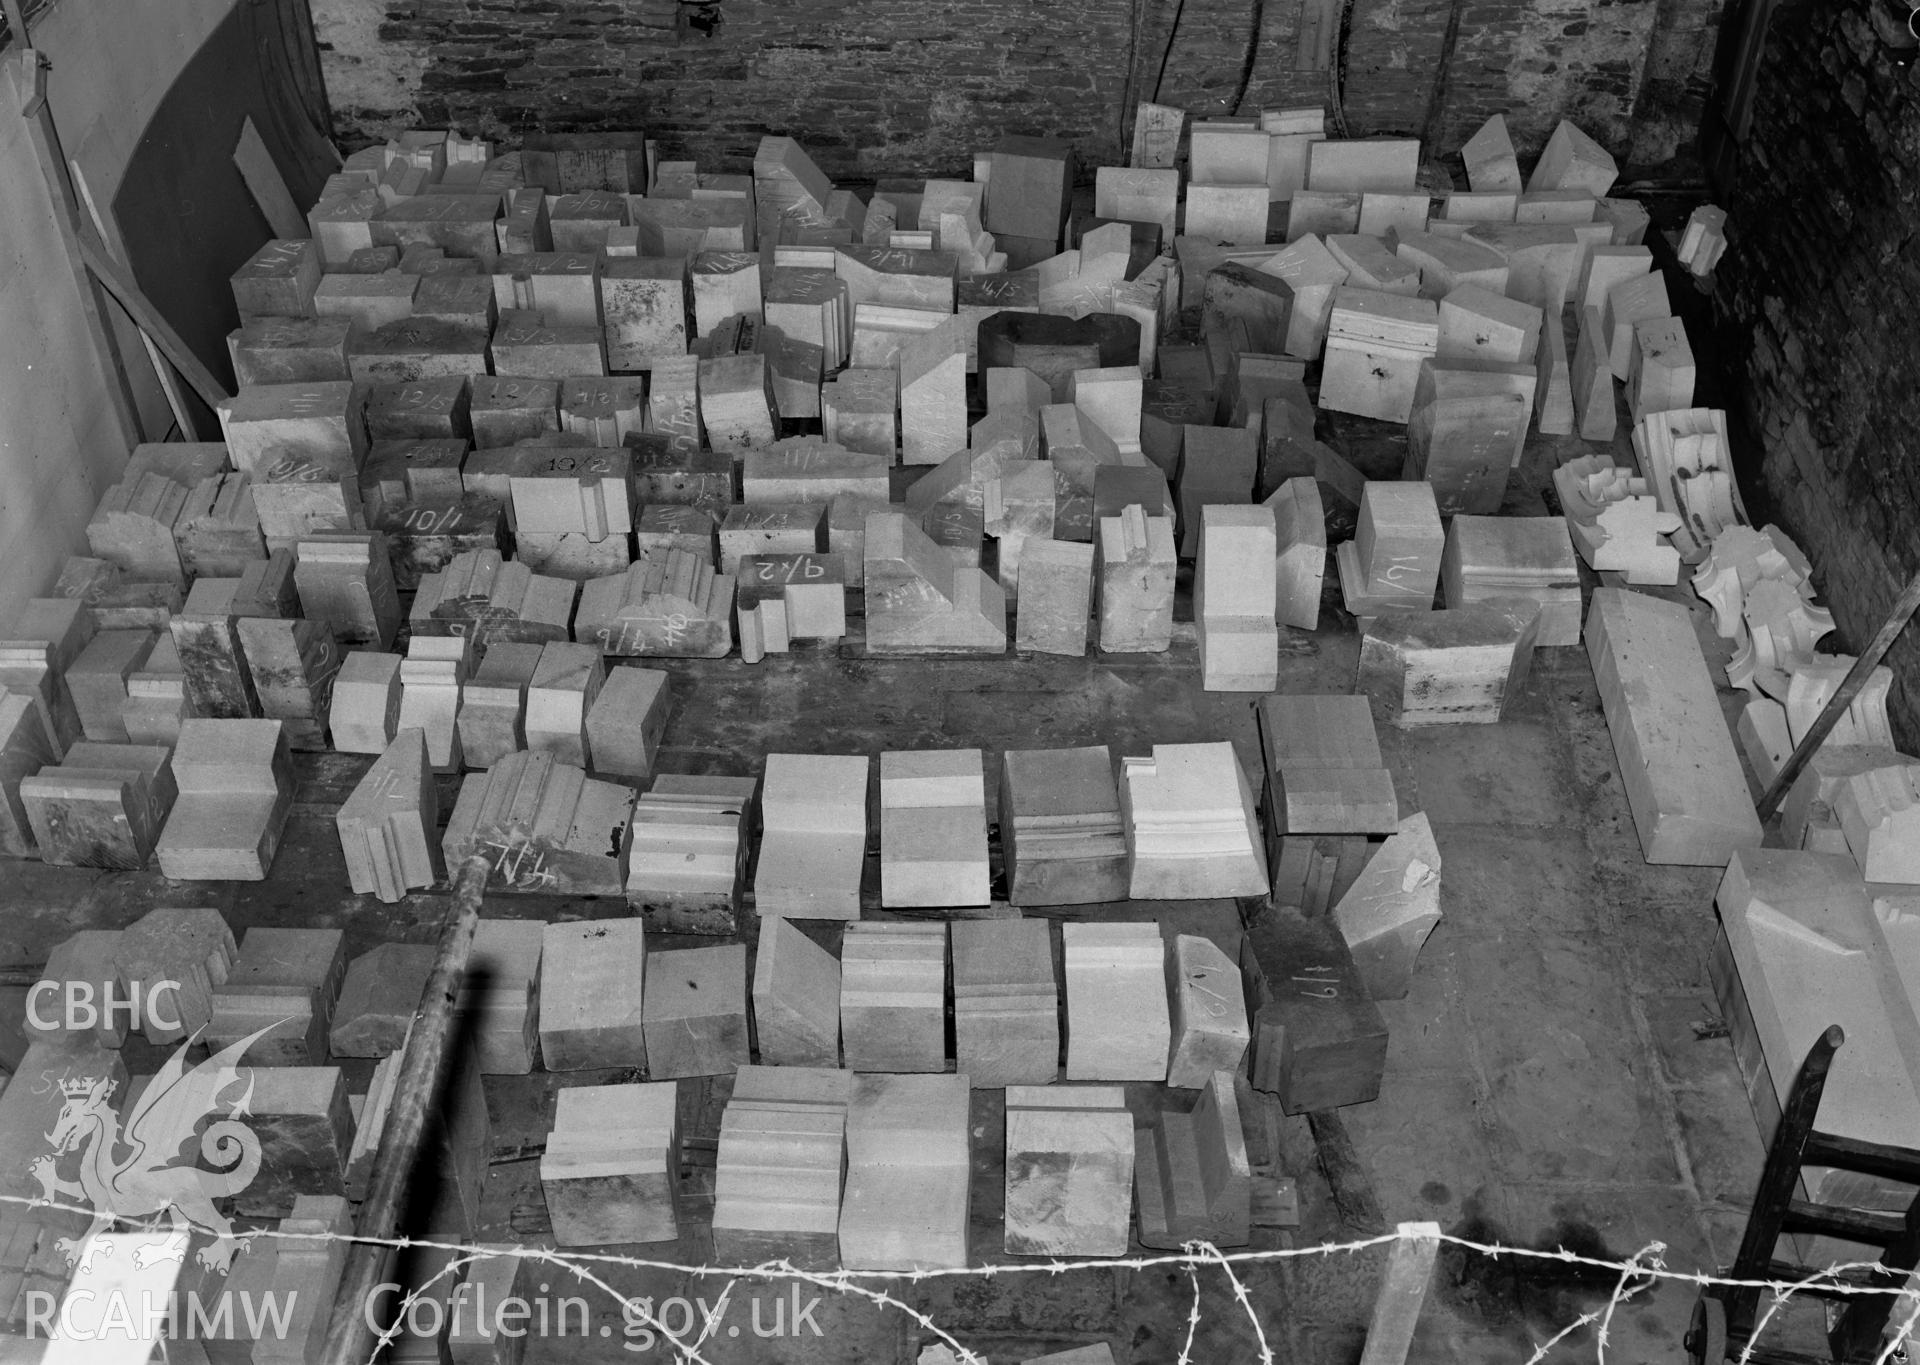 D.O.E photographs of Caerphilly Castle - view of finished stones for windows 1 & 2 in the Hall.